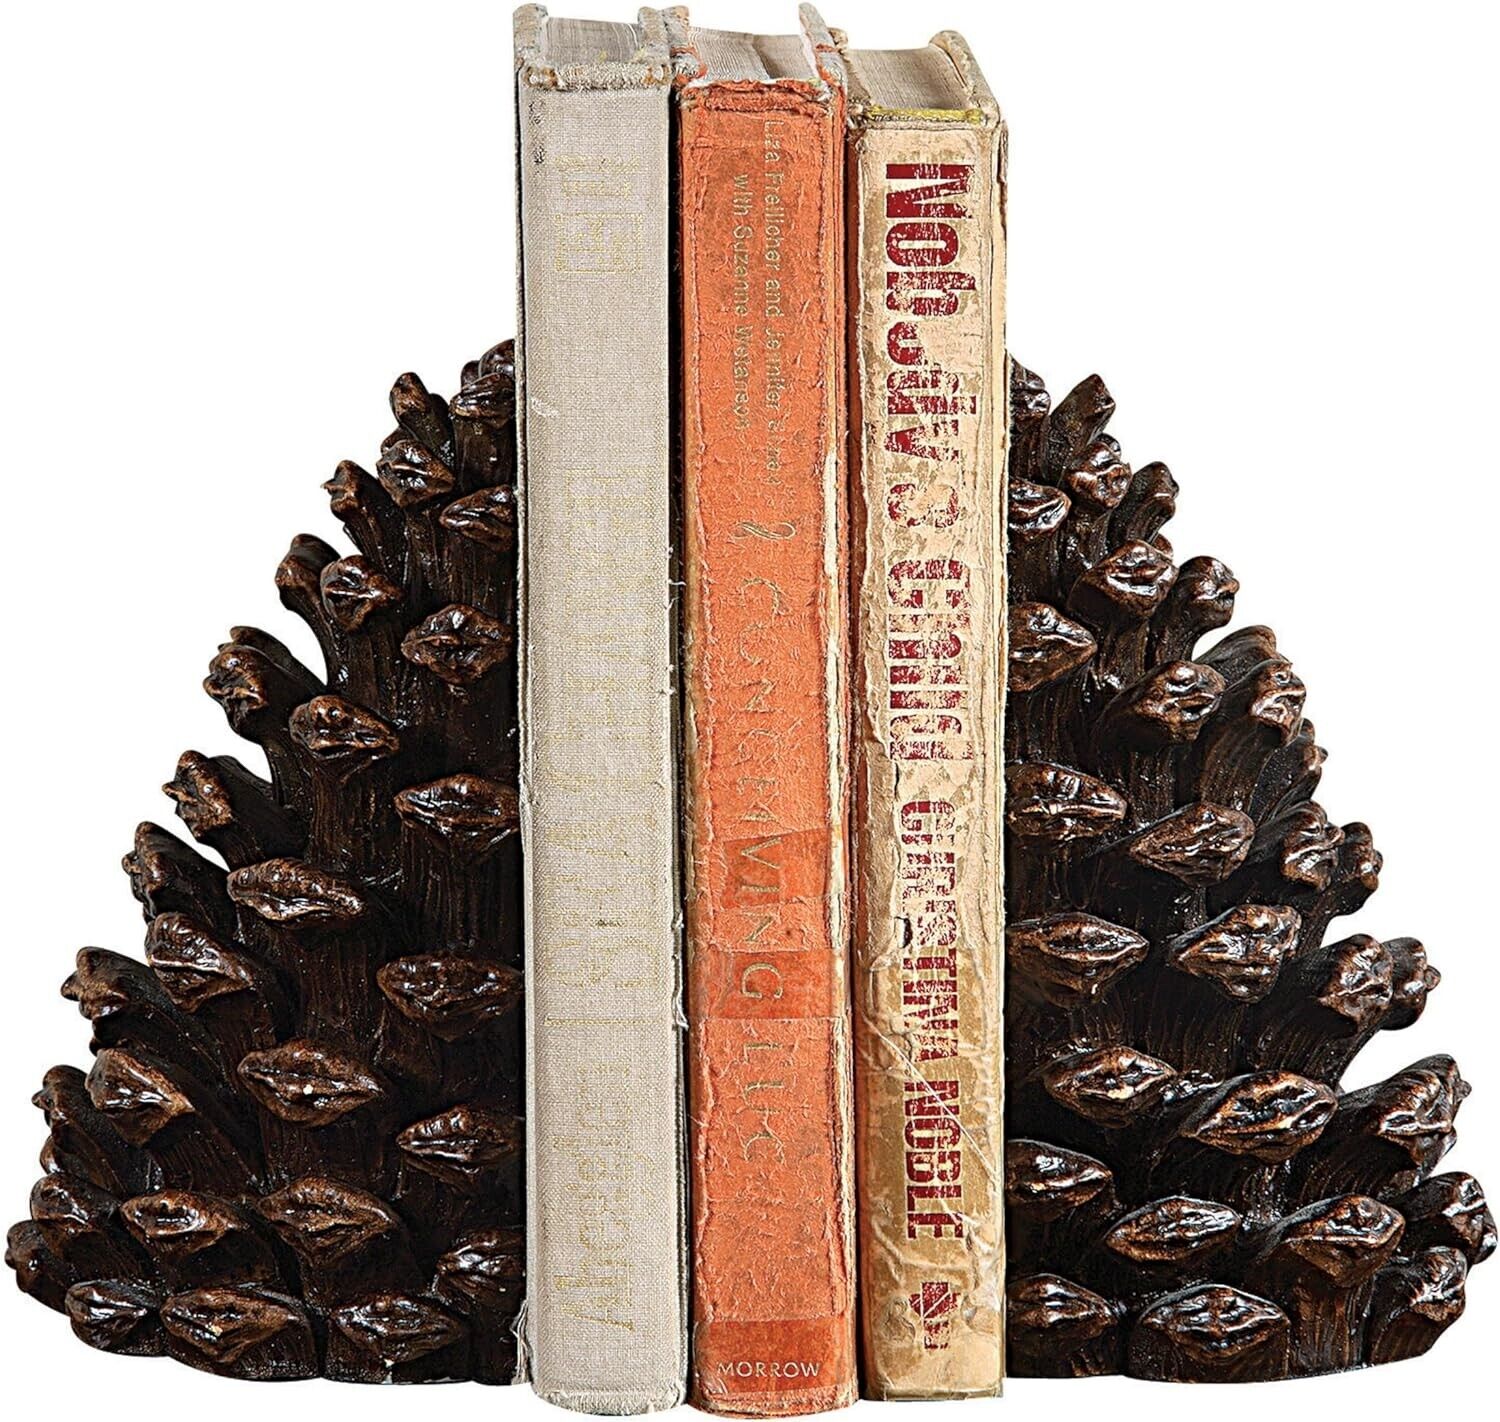 Pair of Pinecone Shaped Resin Bookends (Set of 2 Pieces)  7 inches High